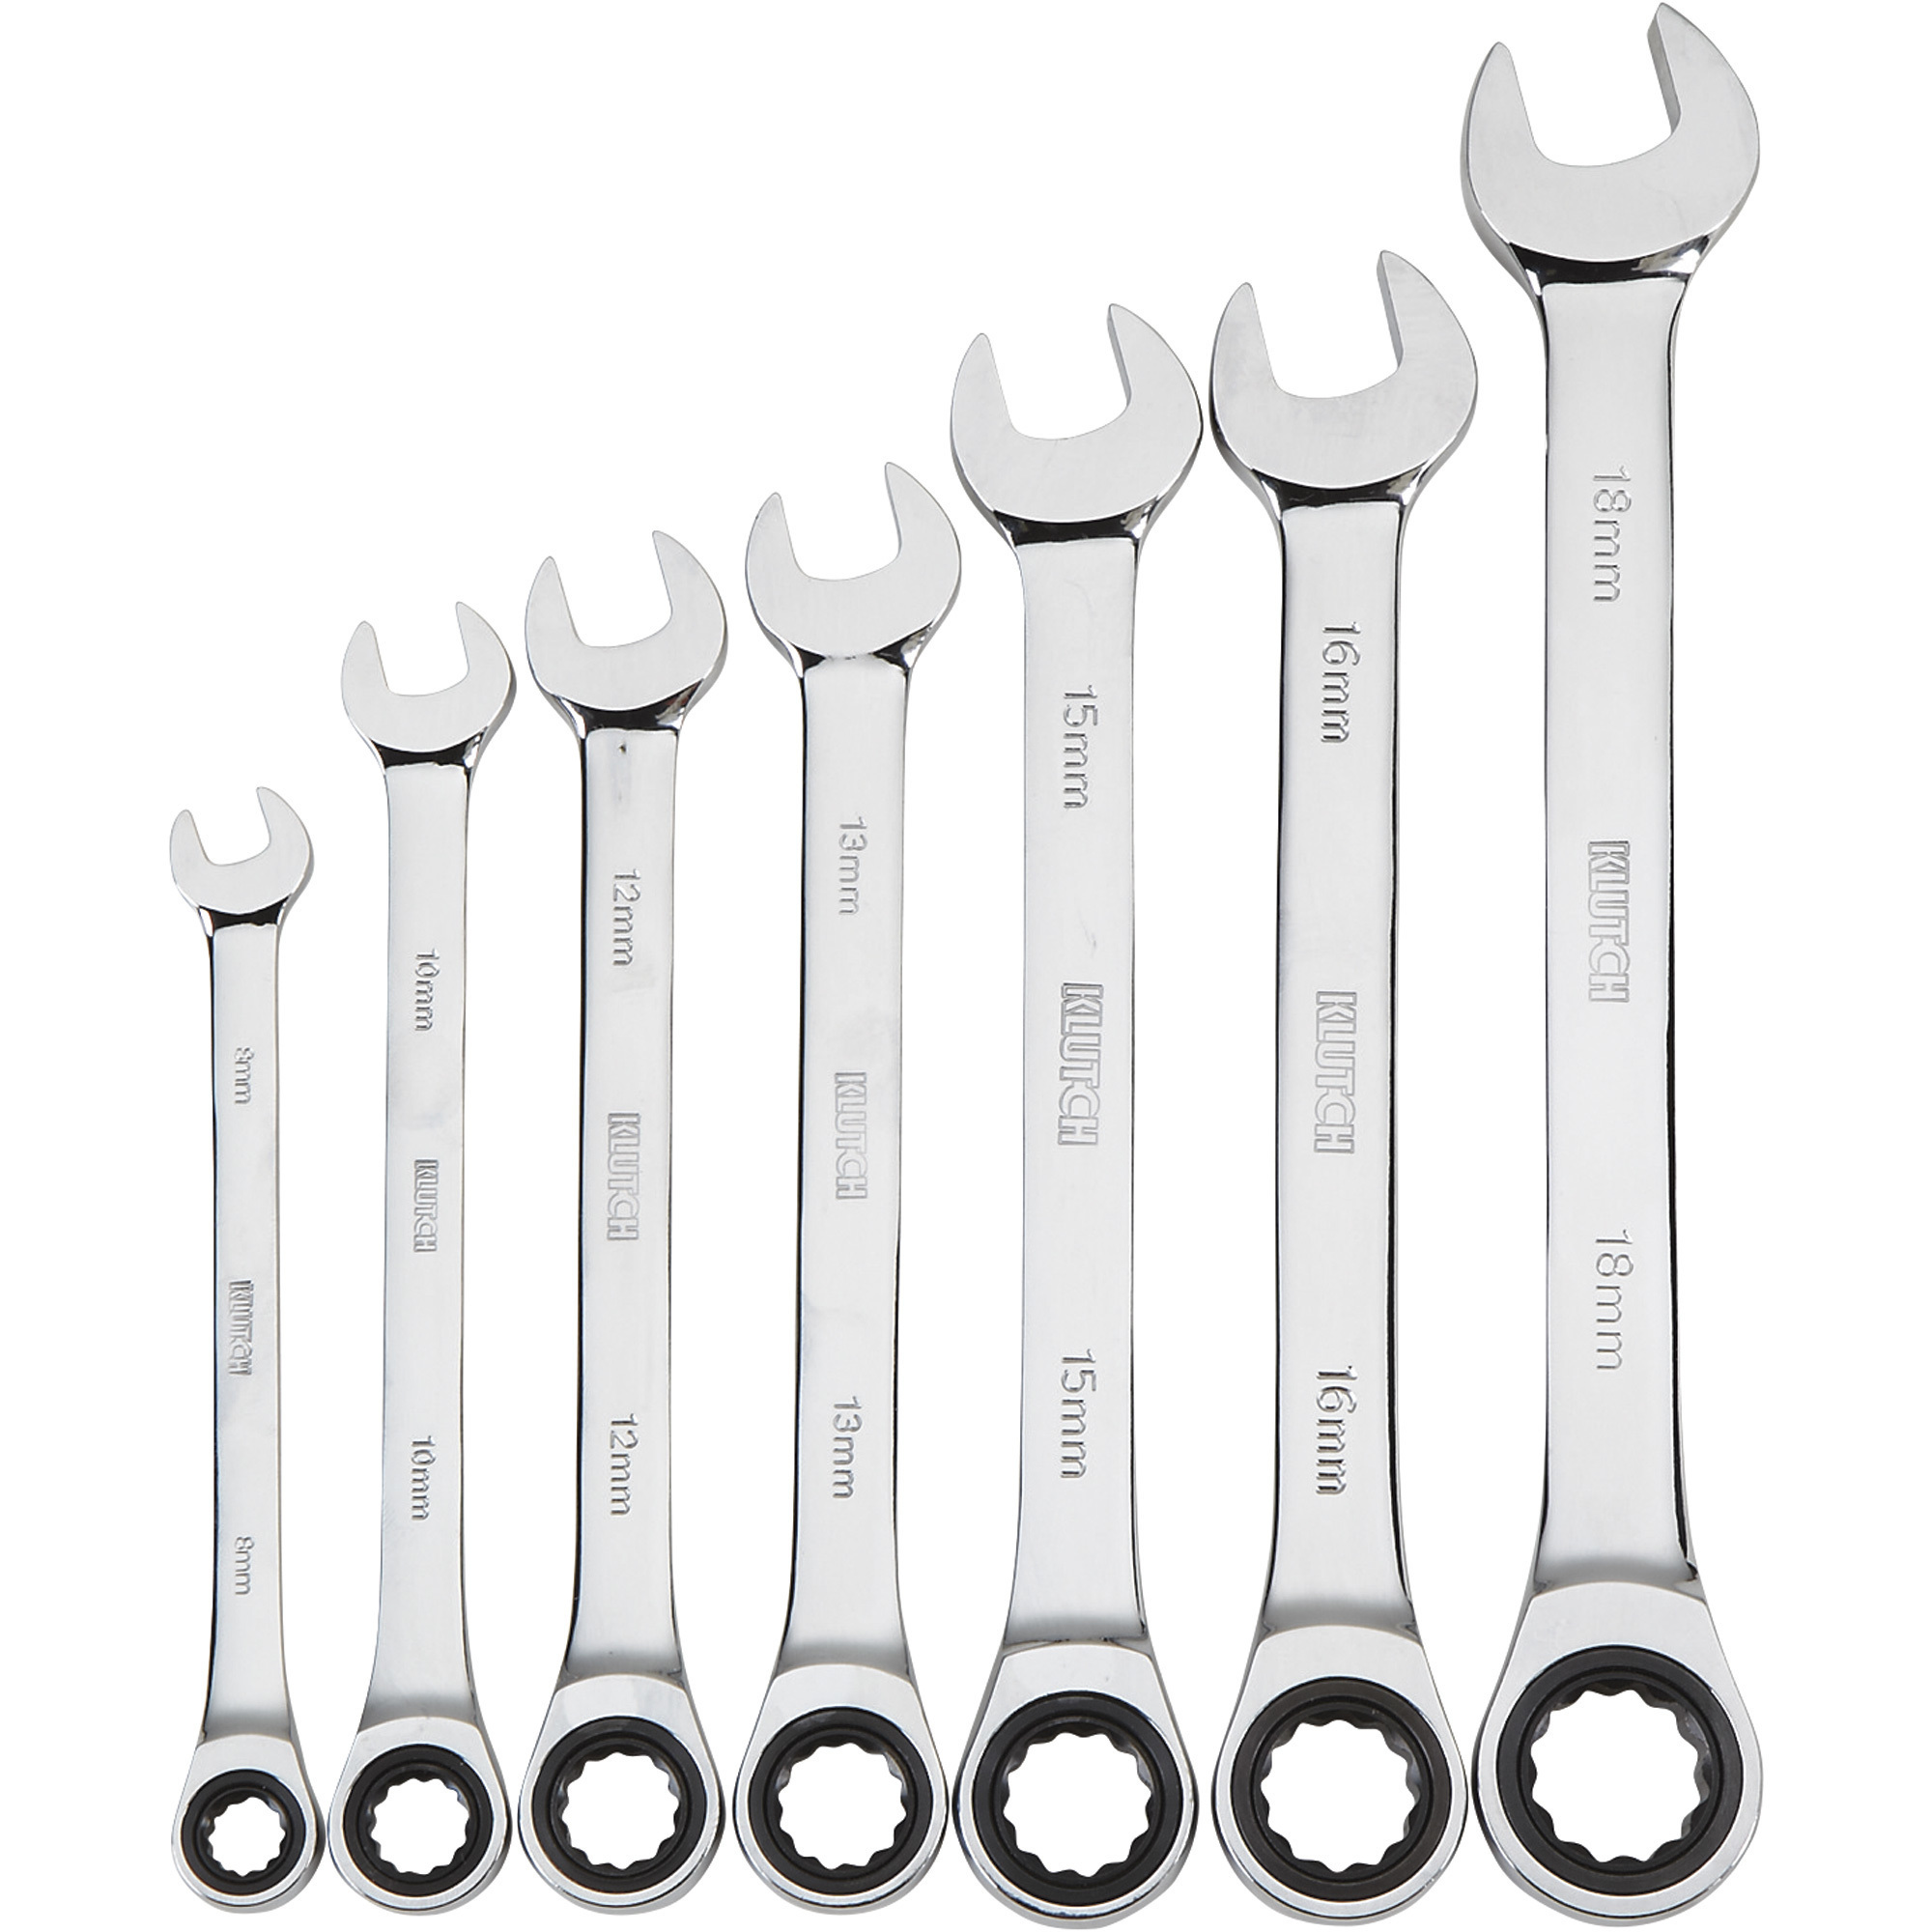 Klutch Ratcheting Wrench Set, 7-Piece, Metric: 8-18mm